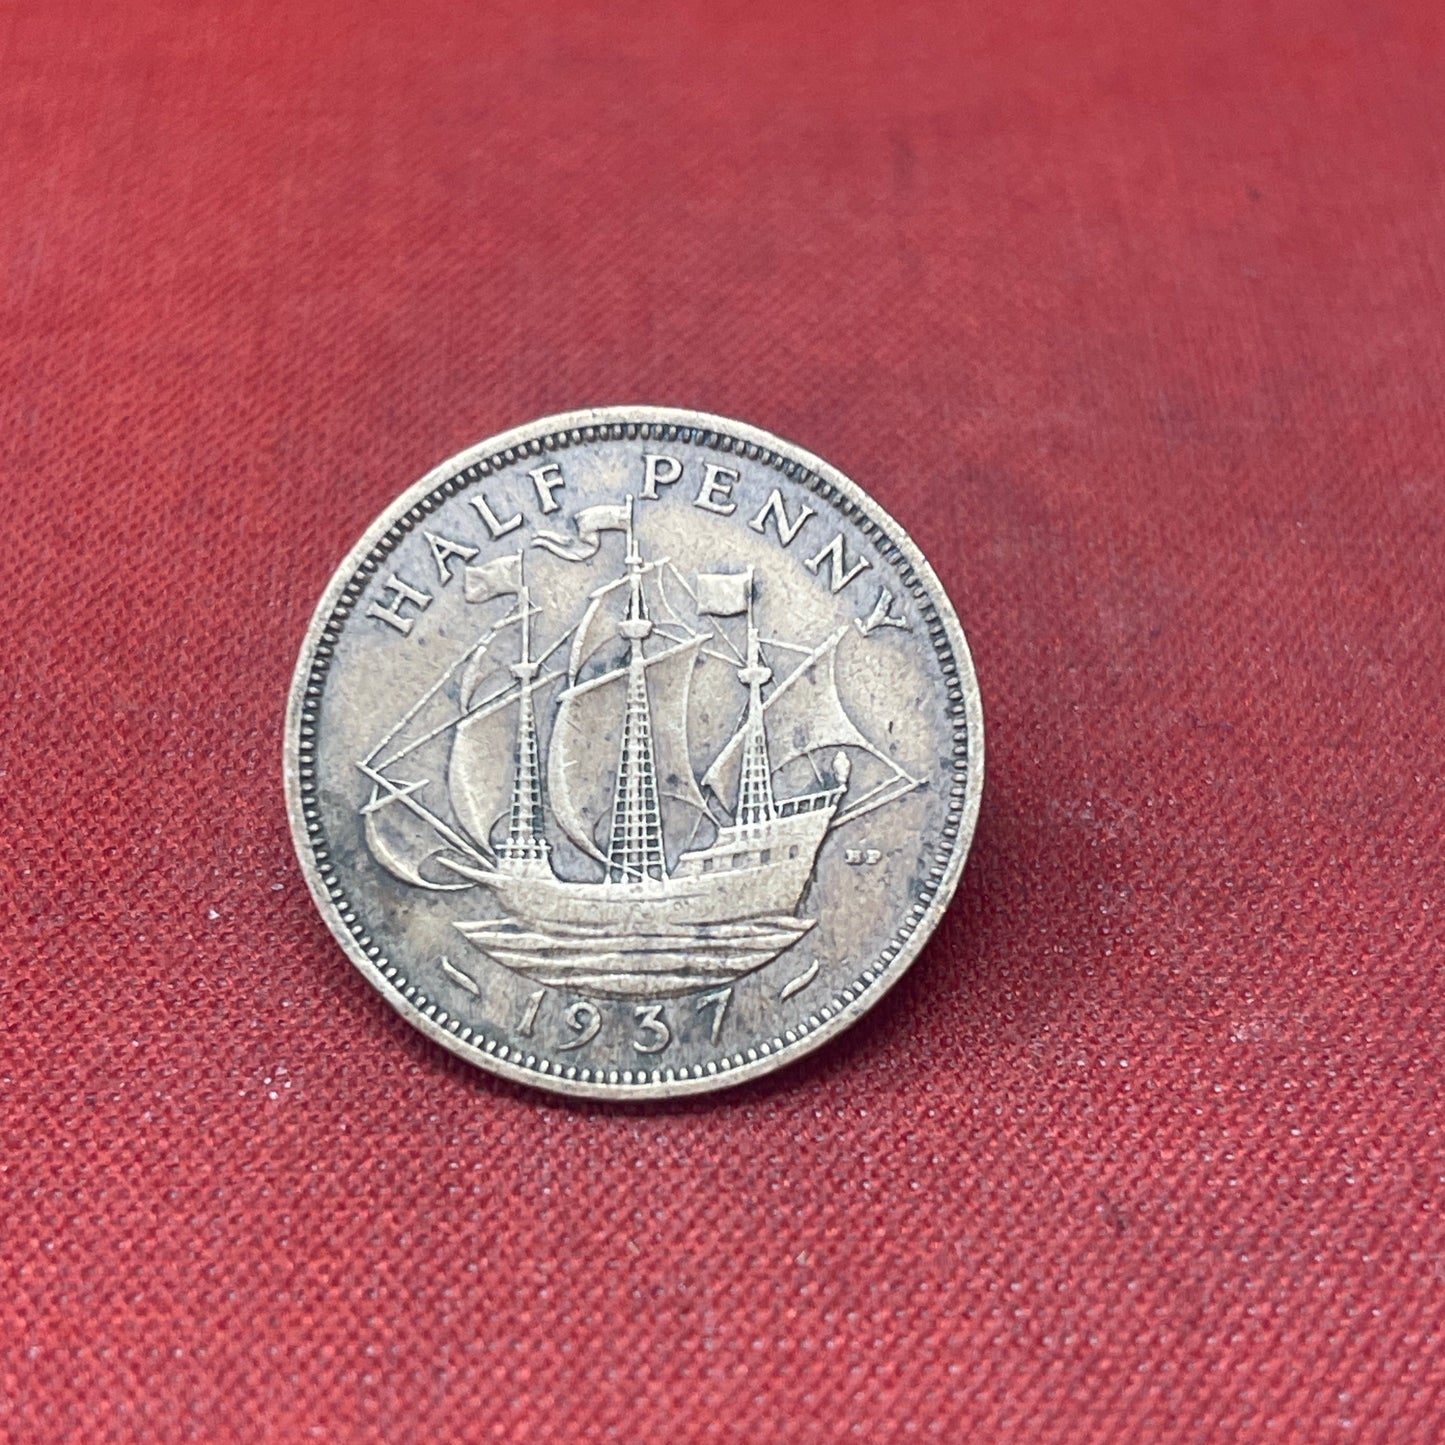 Explore the historical significance of the King George VI 1937 Half Penny. This iconic coin features the Golden Hind and the portrait of George VI, perfect for collectors and history enthusiasts